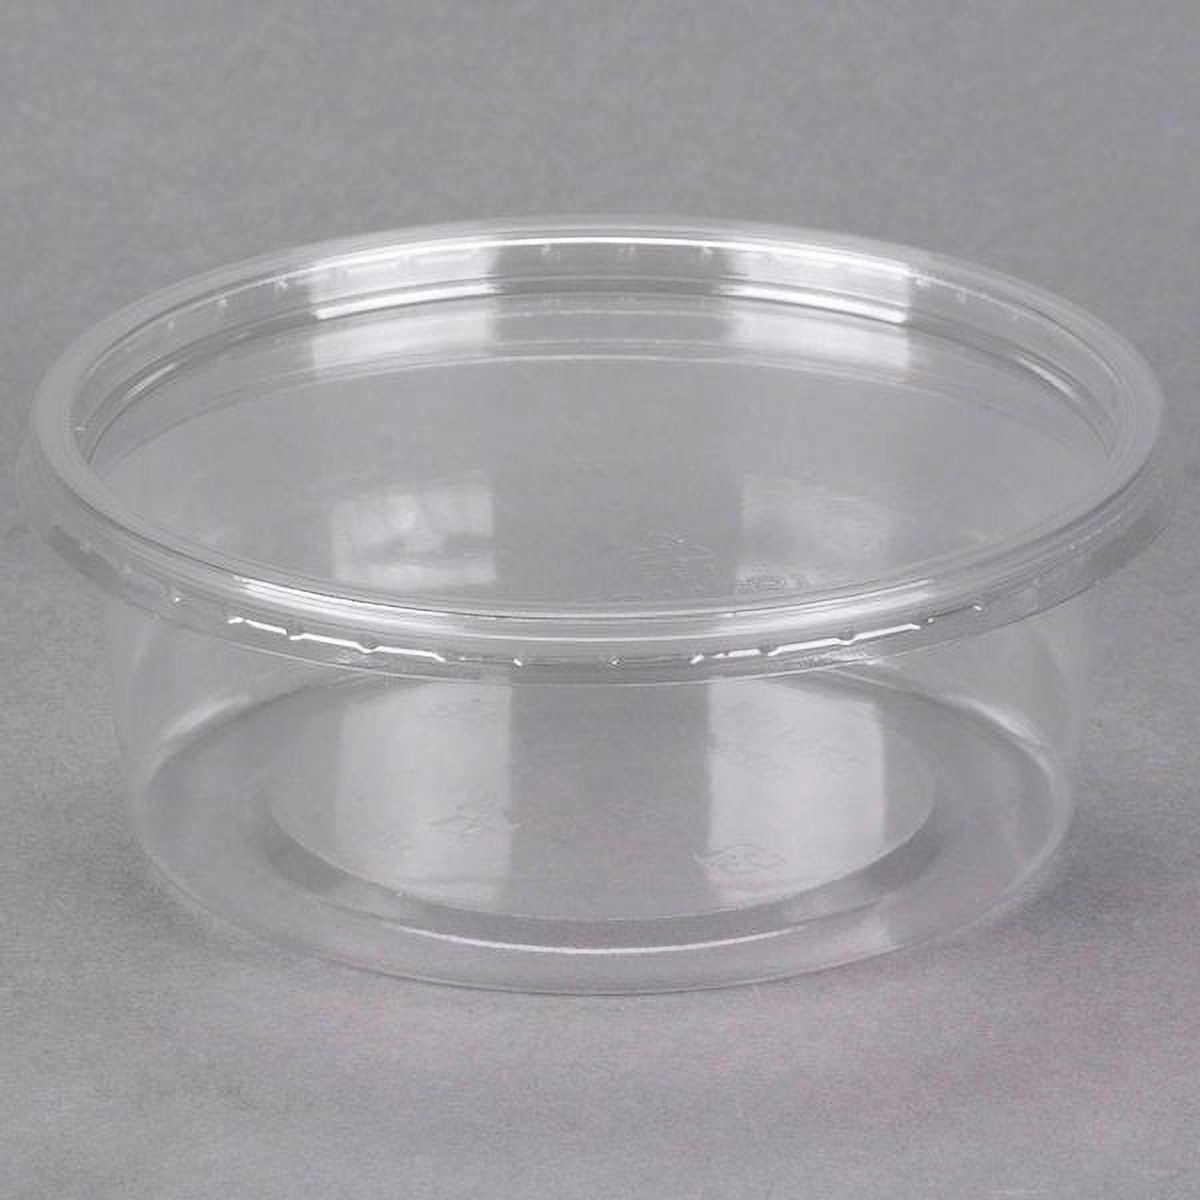 Choice 16 oz. Ultra Clear PET Plastic Round Deli Container - 50/Pack